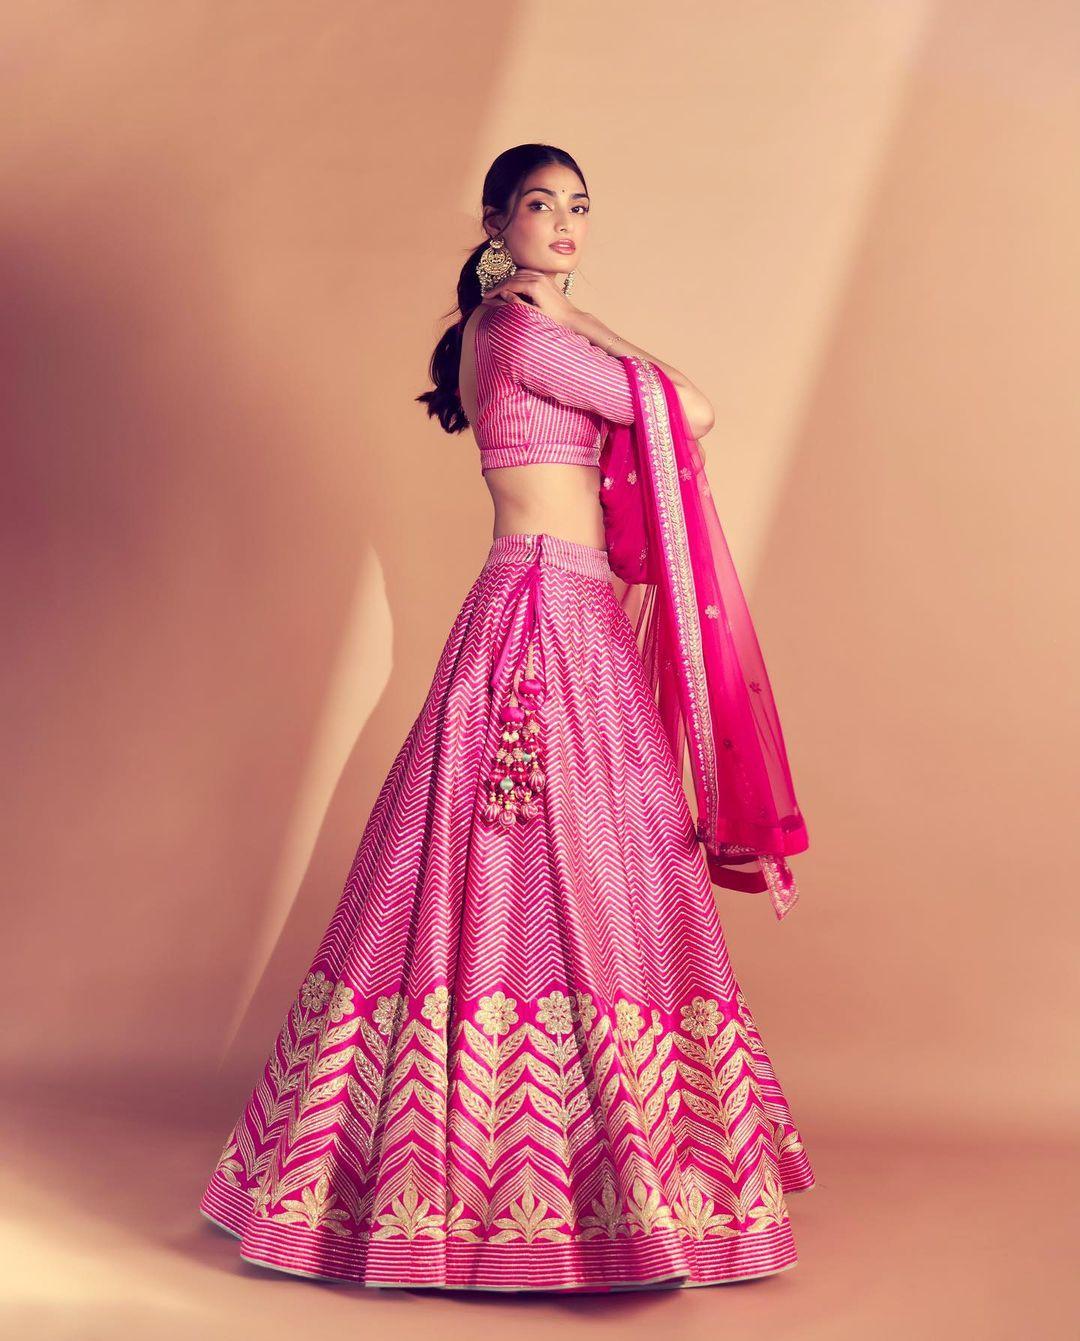 Do you want to dress like Barbie this Diwali? This pink lehenga should be your first choice